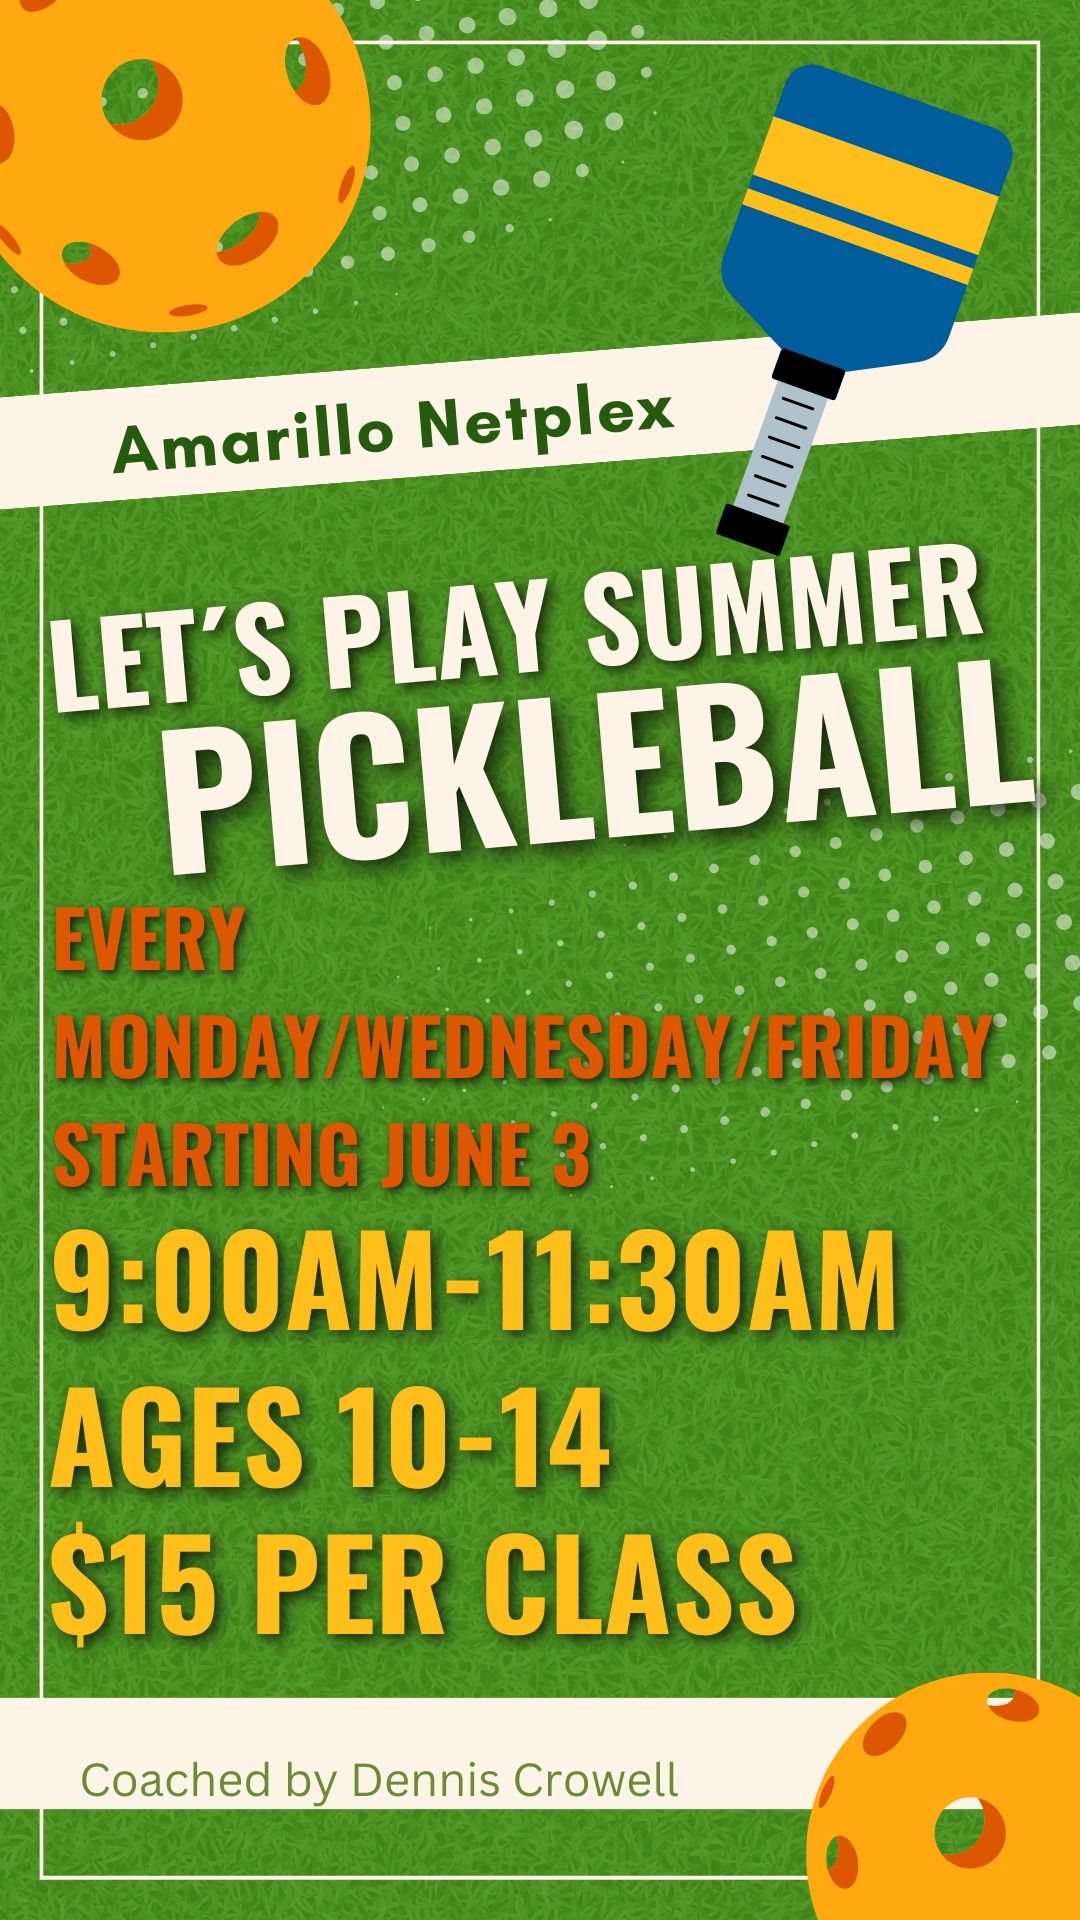 Junior Pickleball Clinic - Ages 10-14